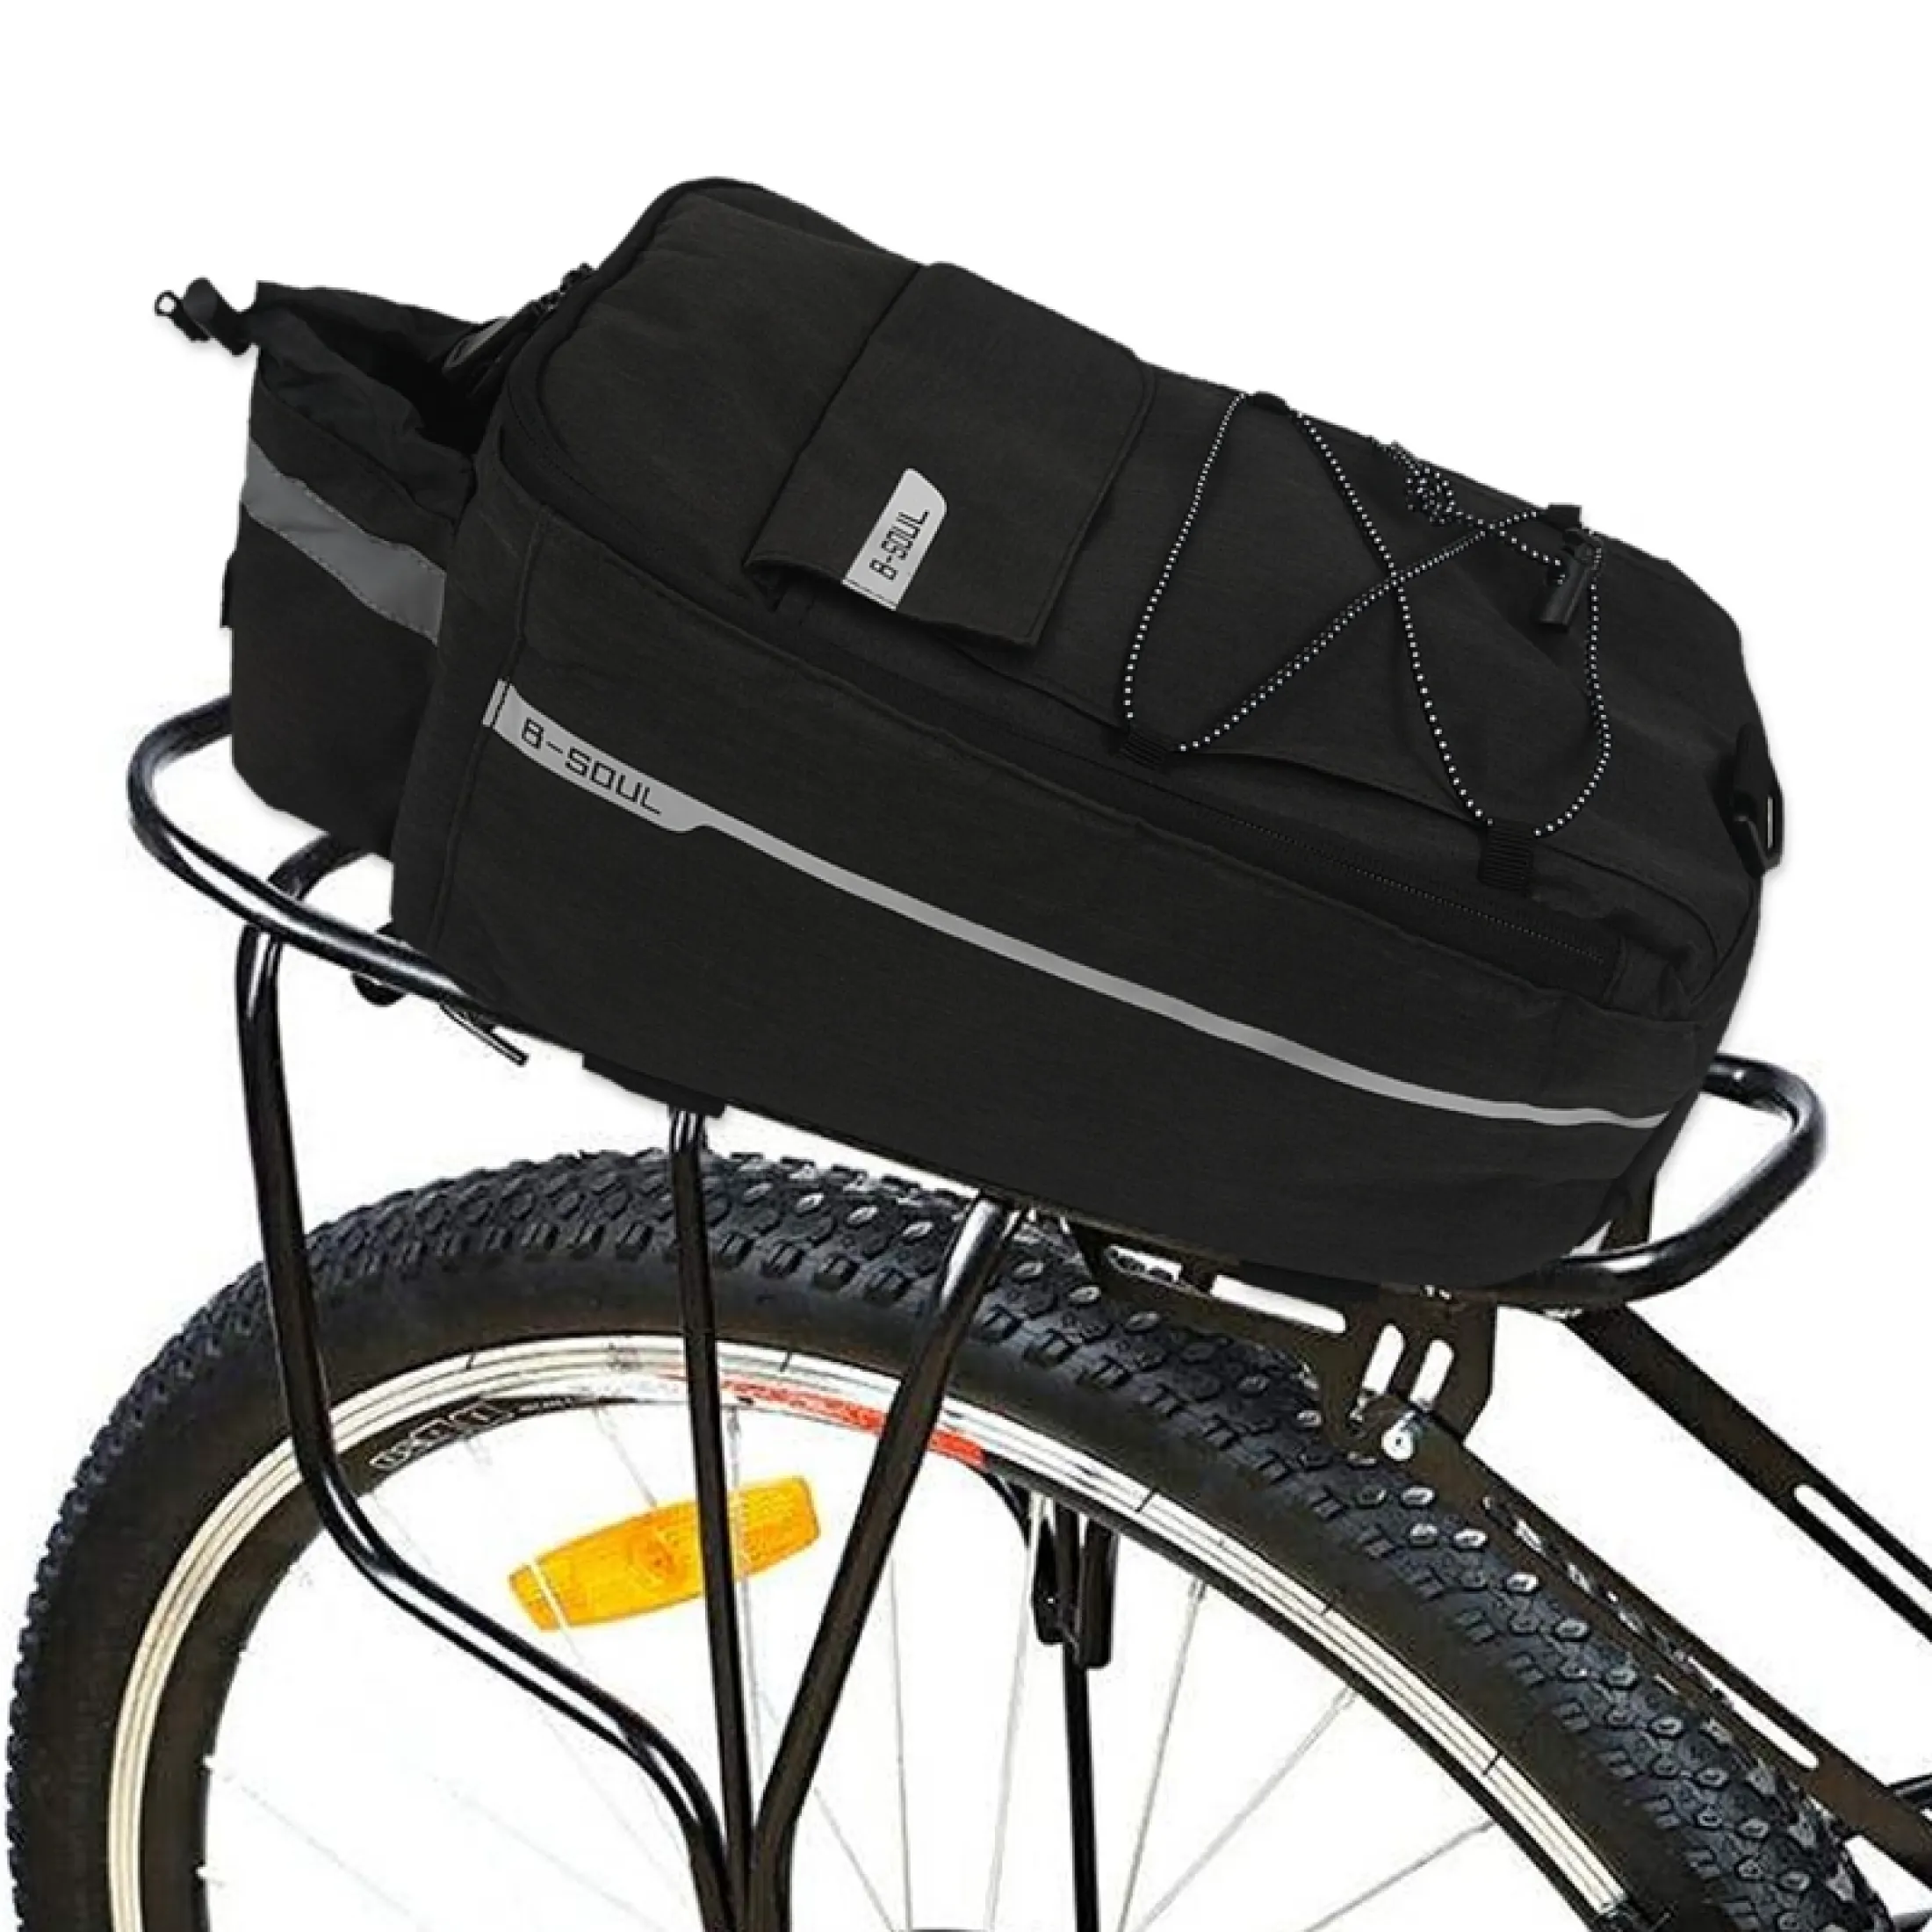 B-SOUL Insulated Trunk Cooler Bag Cycling Bicycle Rear Rack Storage Luggage Bag